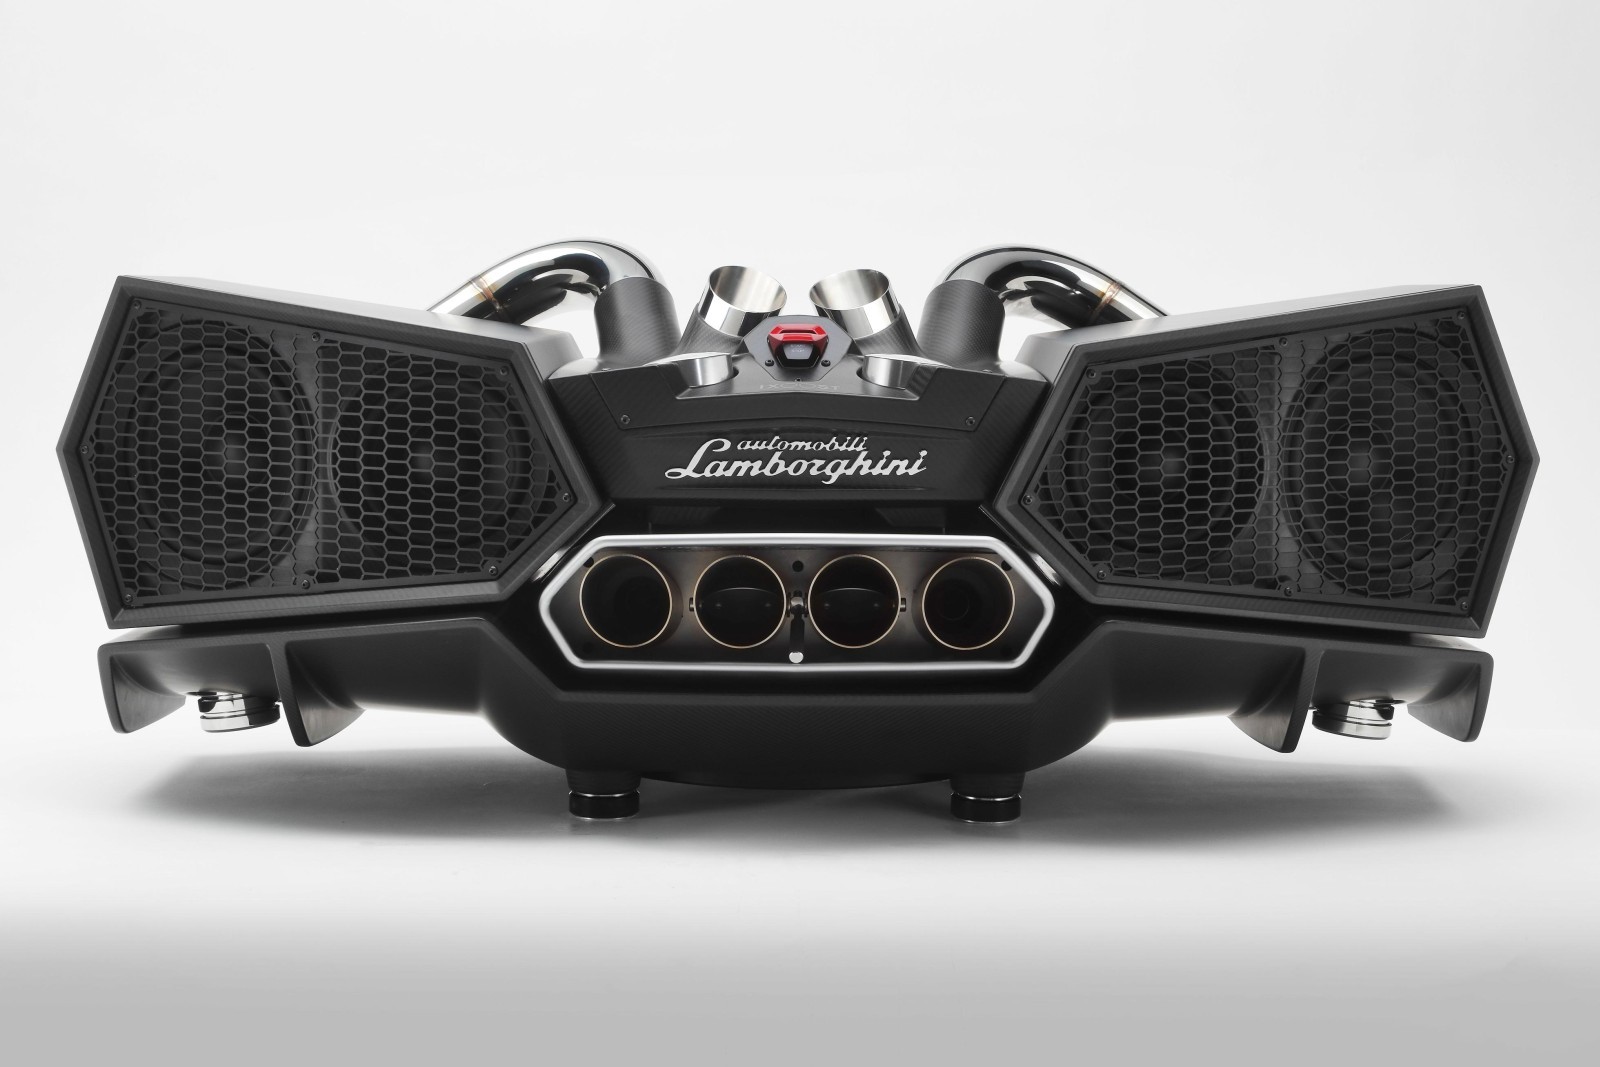 esavox-lamborghini-docking-station-costs-24800-is-made-with-carbon_5.jpg